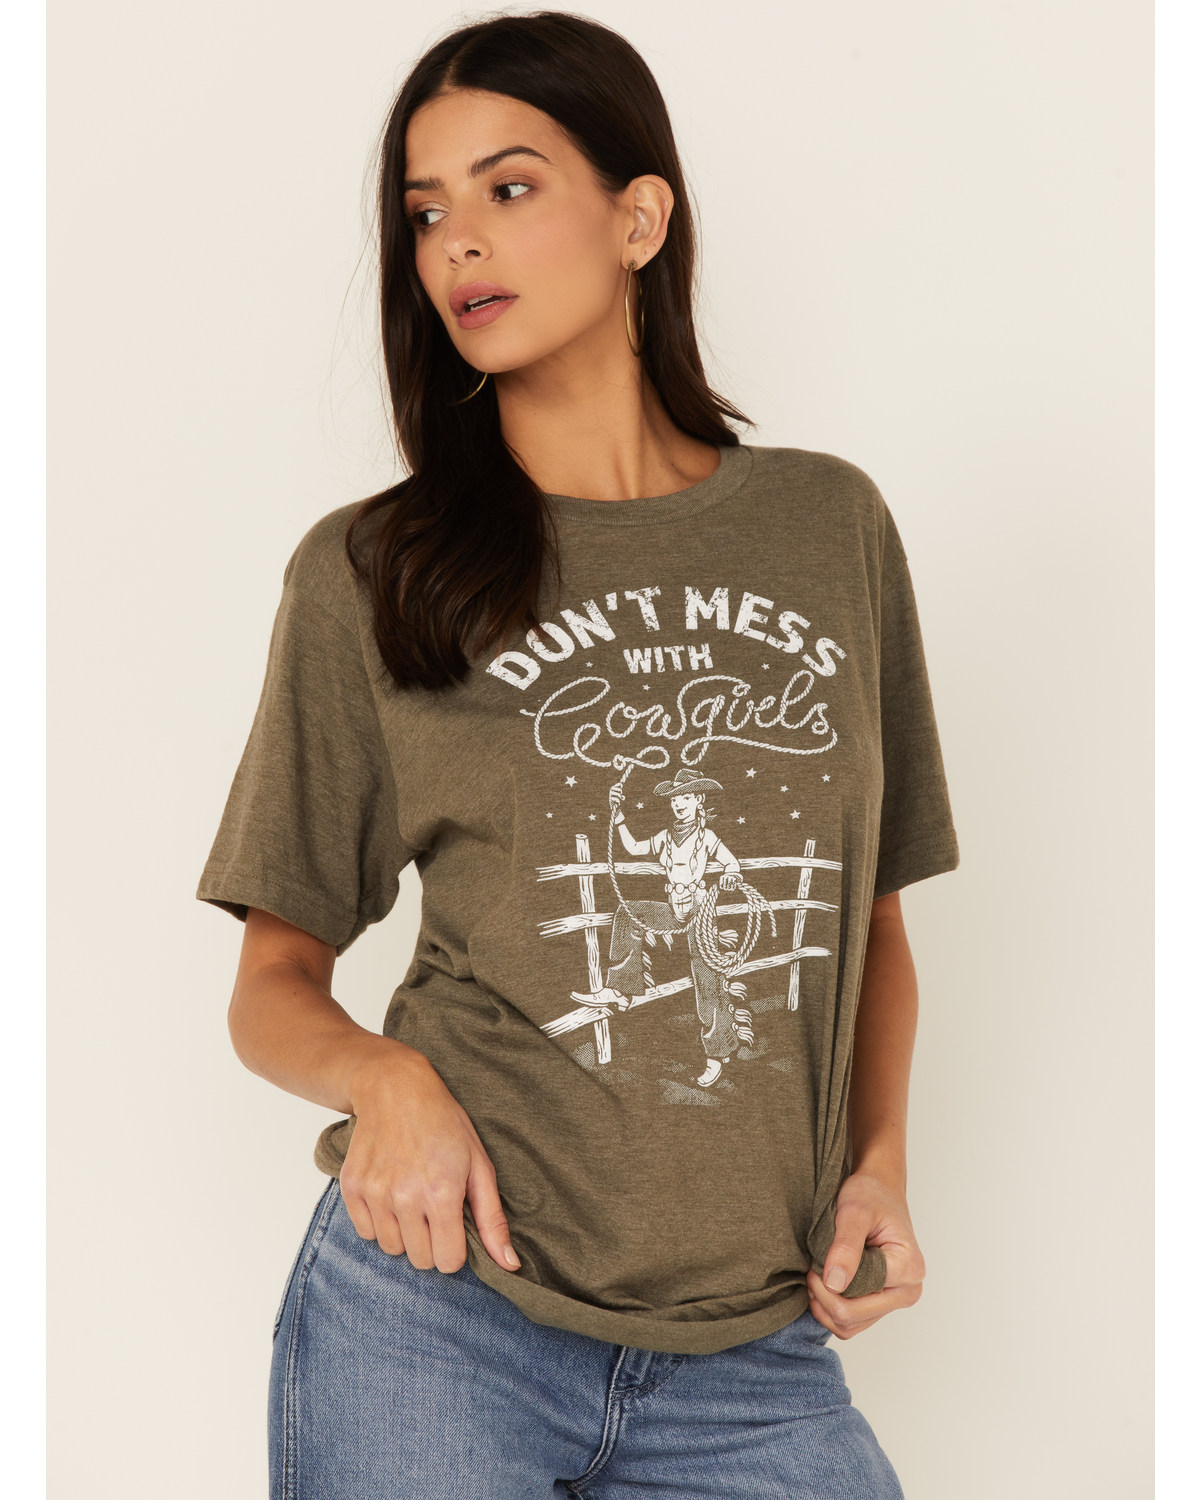 Ali Dee Women's Don't Mess with Cowgirls Graphic Tee